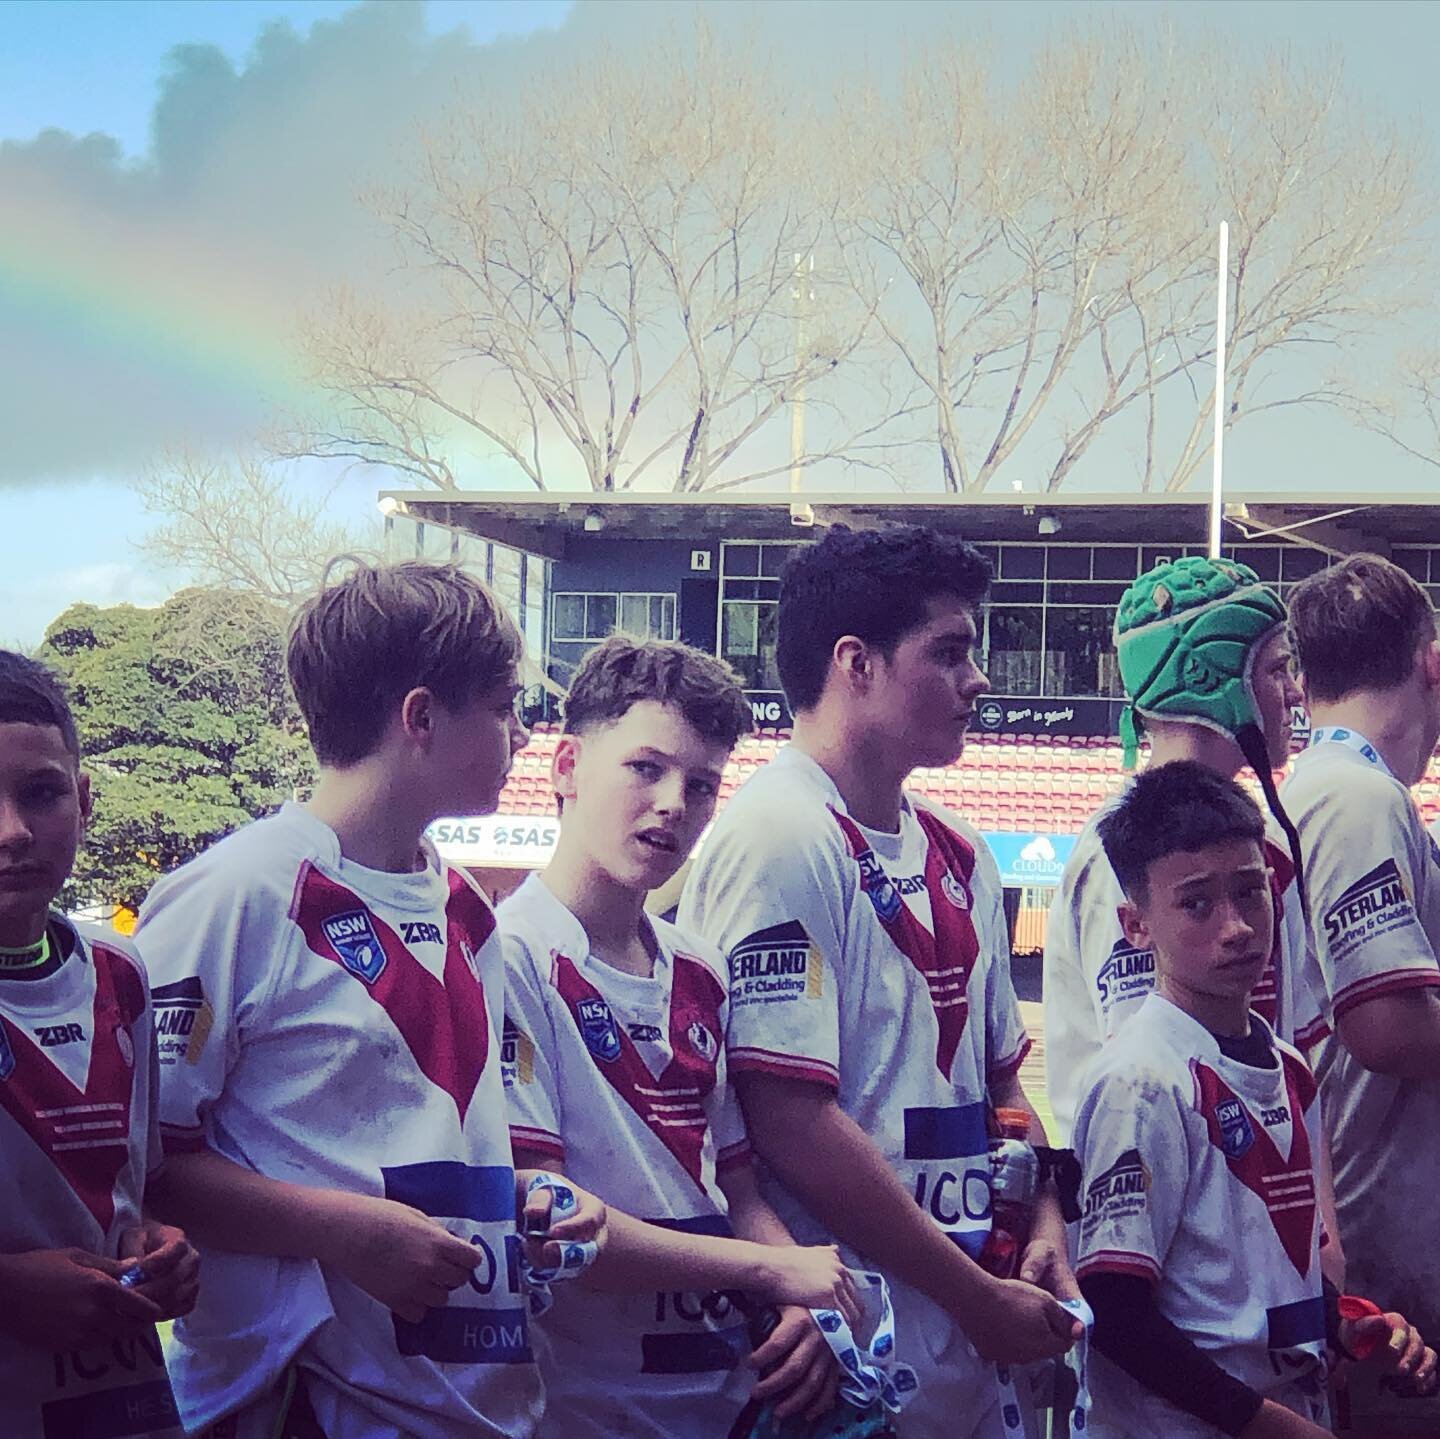 Very proud of Elijah playing in his Rugby League Grand Final today at Brookvale Oval.
It was a tough and close game - with a final result of 16/12 to the other team.
Both teams played incredibly well and it was a great game to watch. 
My boy is a lit